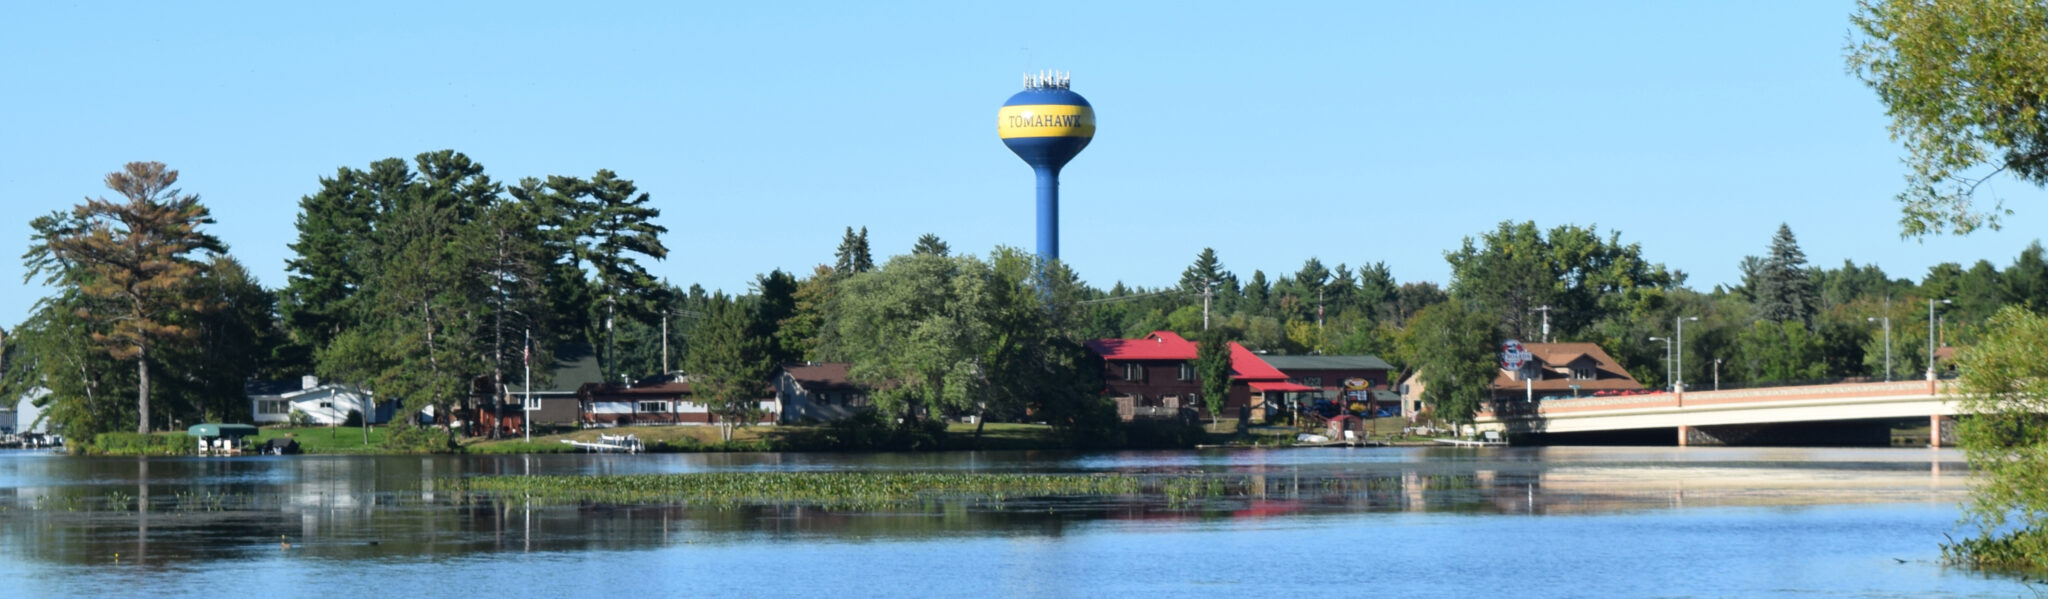 Tomahawk’s water tower up for ‘Tank of the Year’ award